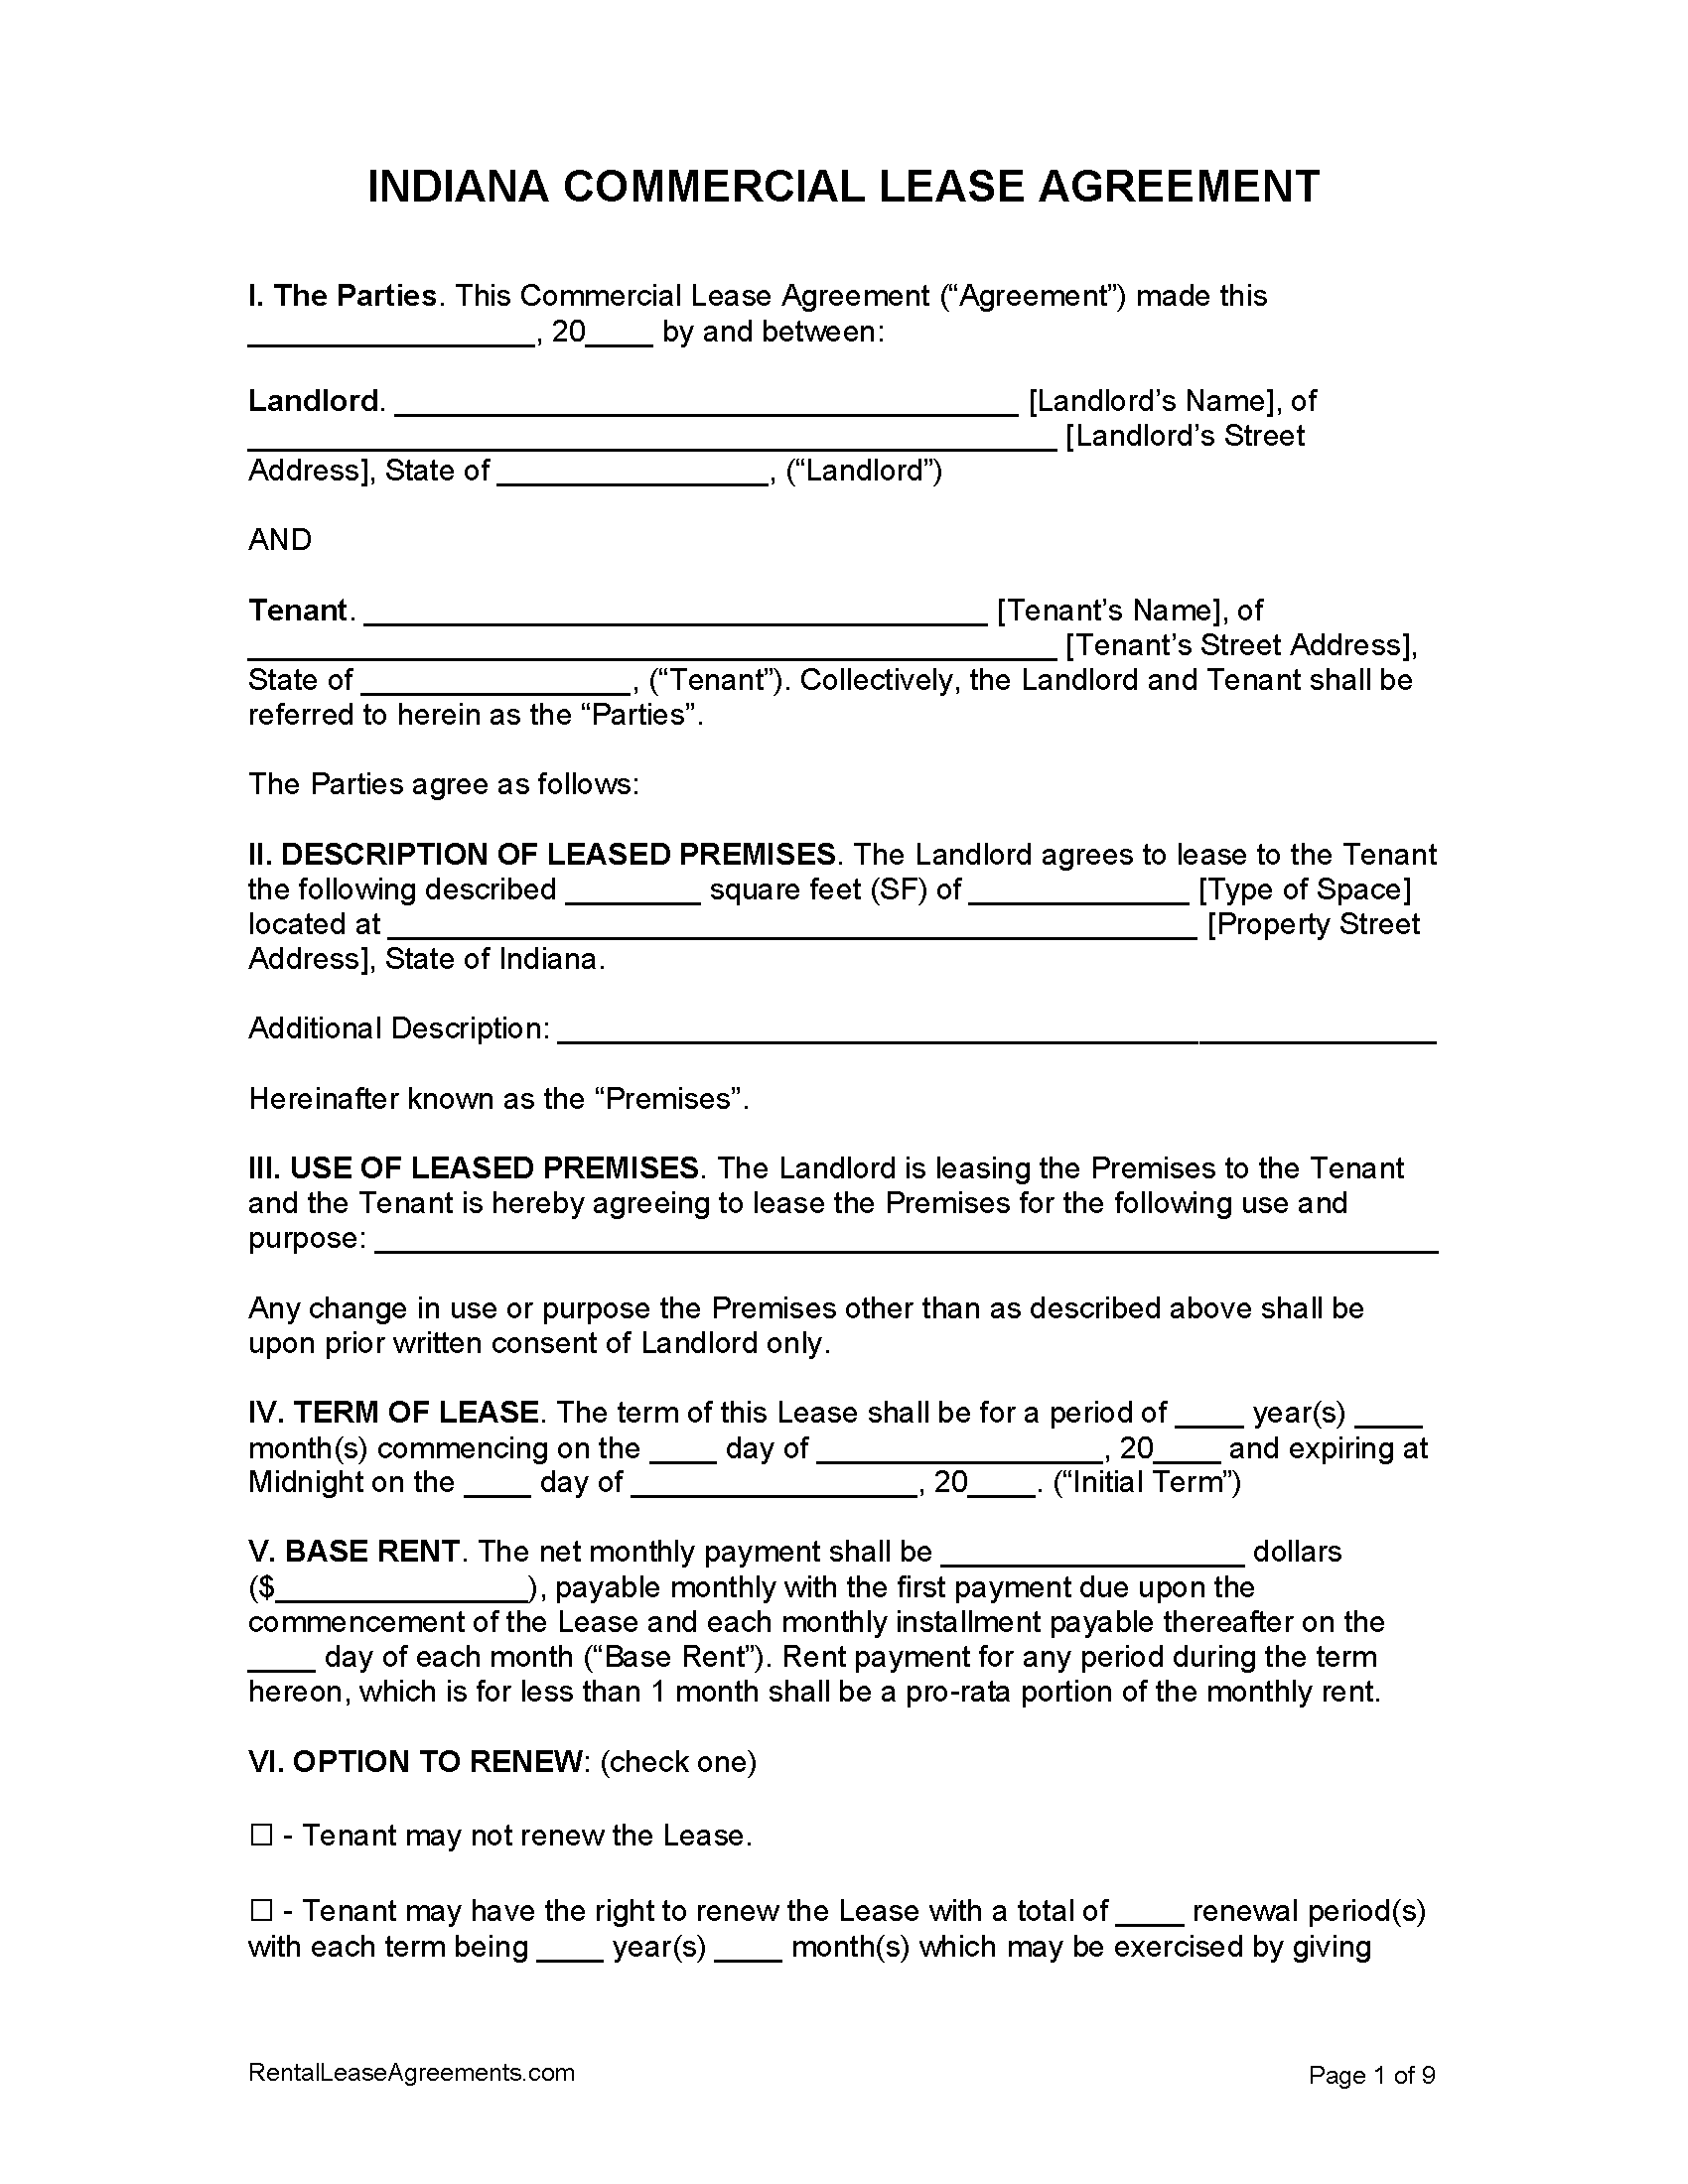 free-indiana-commercial-lease-agreement-pdf-ms-word